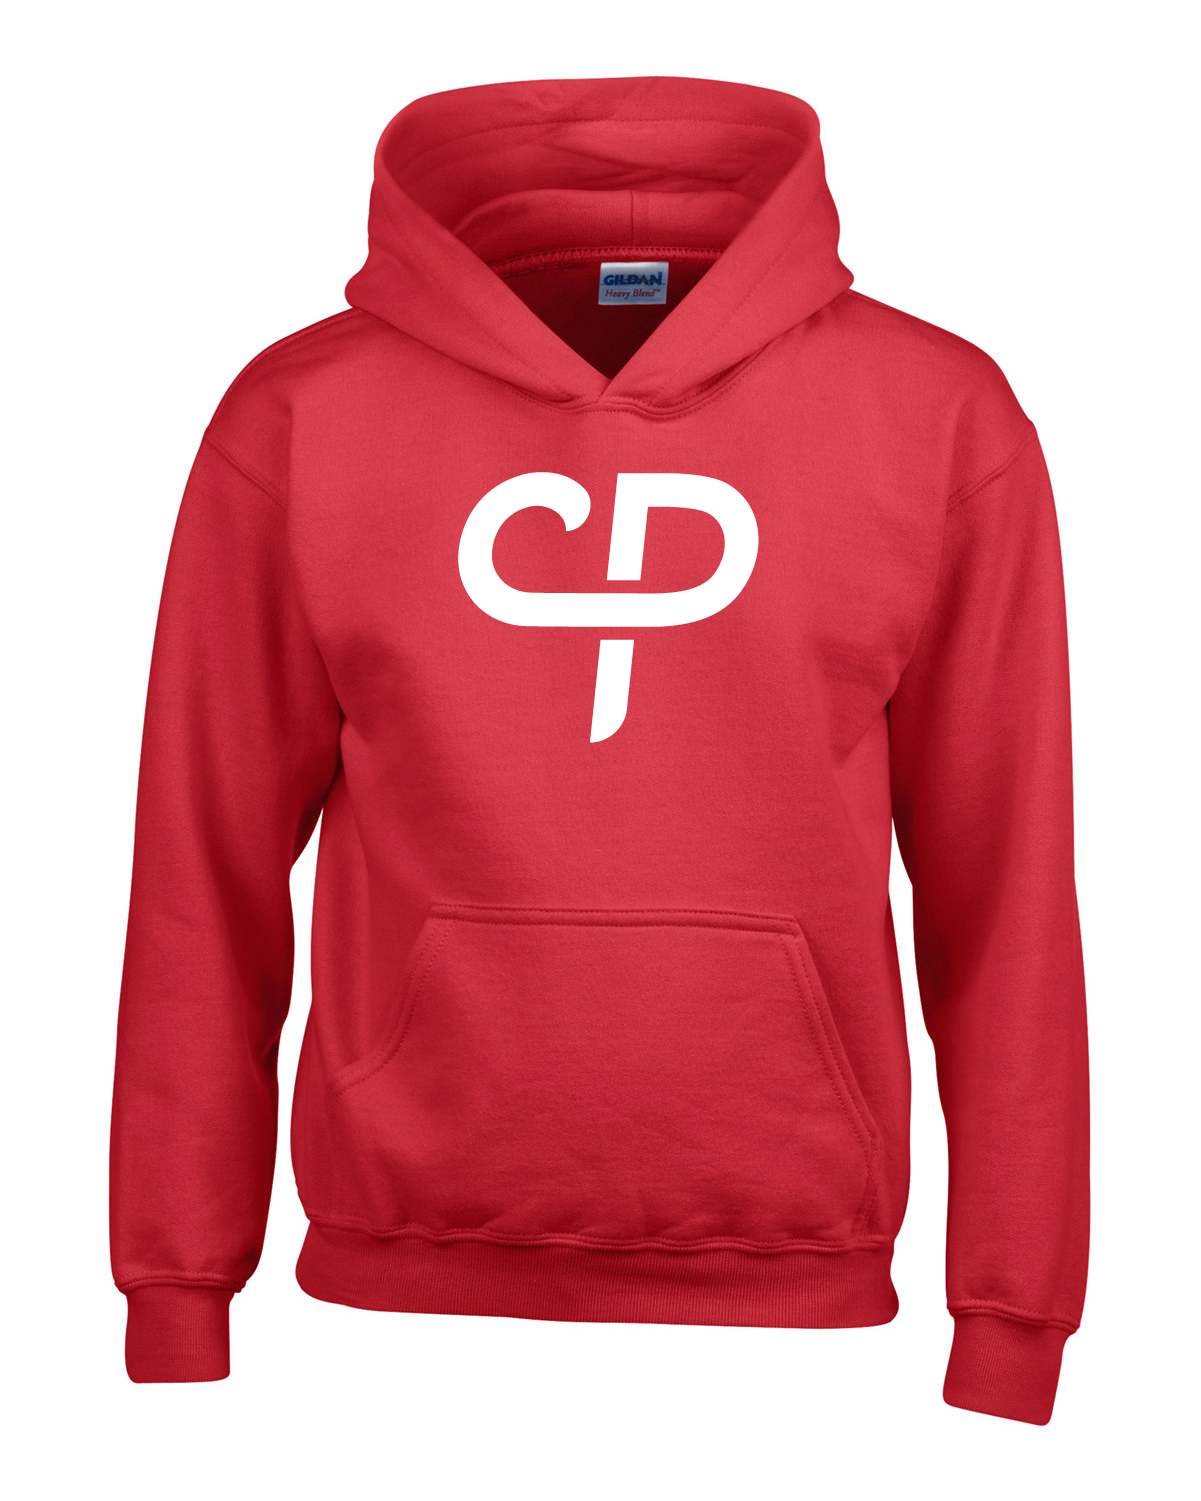 Red youth child's pickleball hoodie hooded sweater with white CP Parenteau logo on front